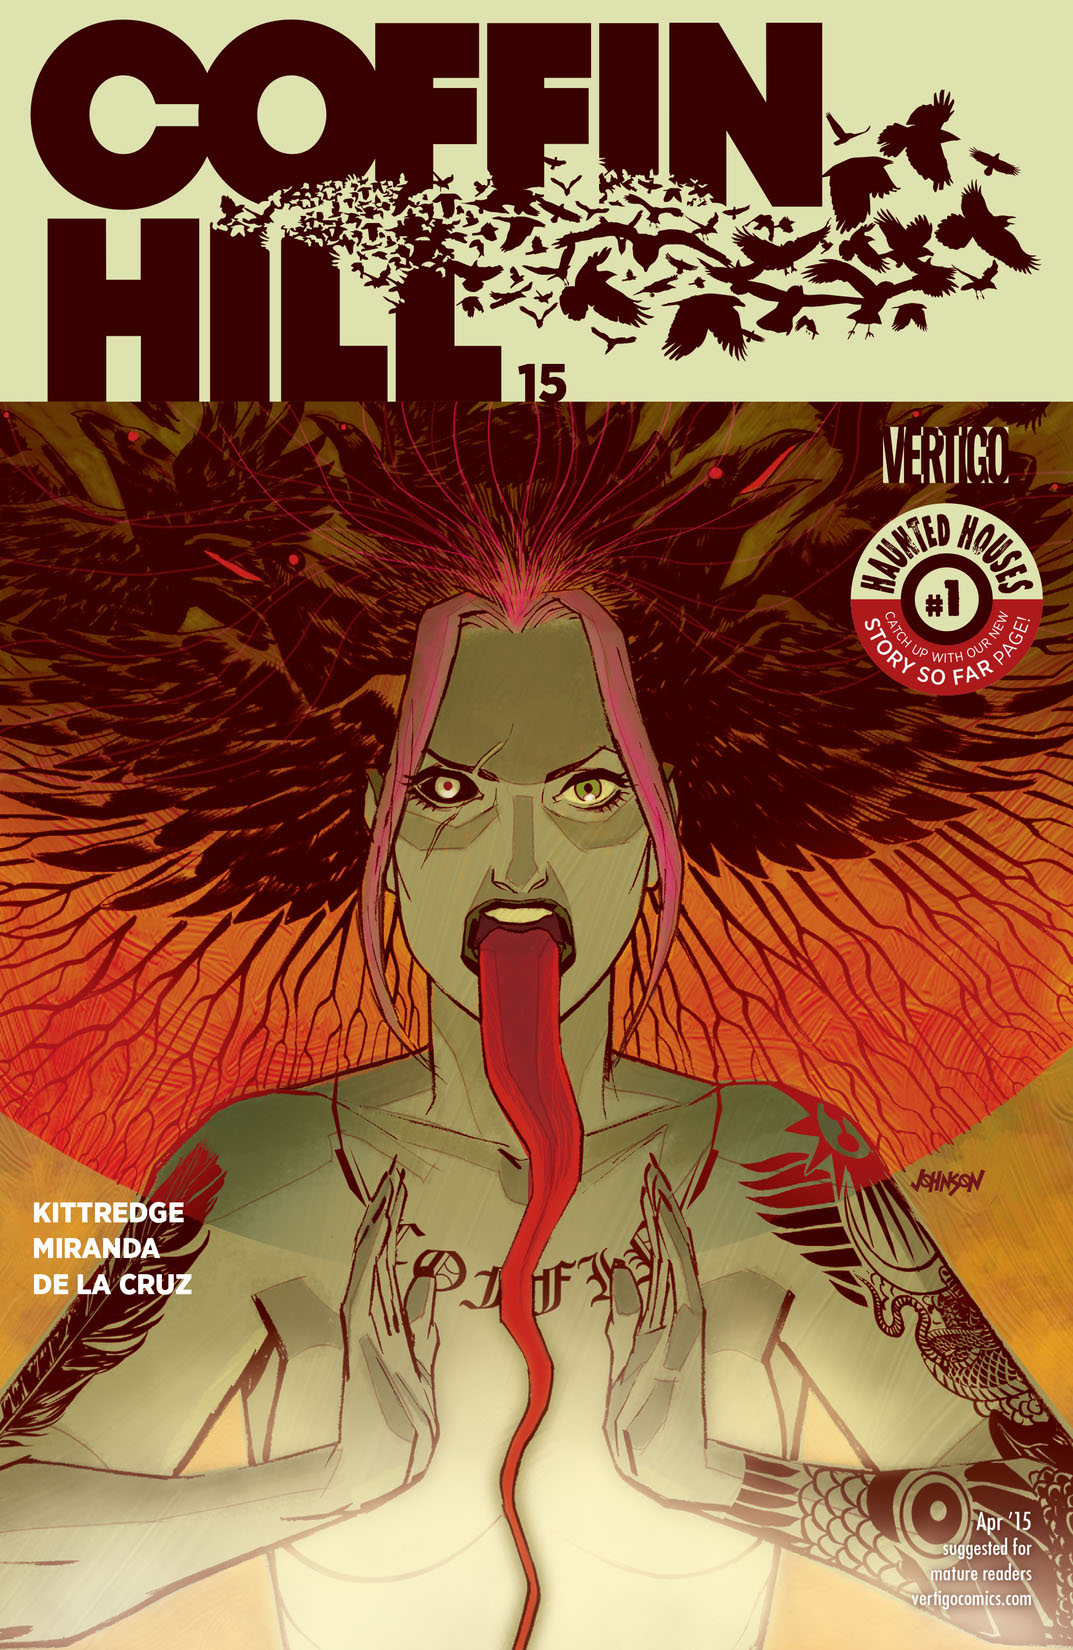 Coffin Hill #15 preview images